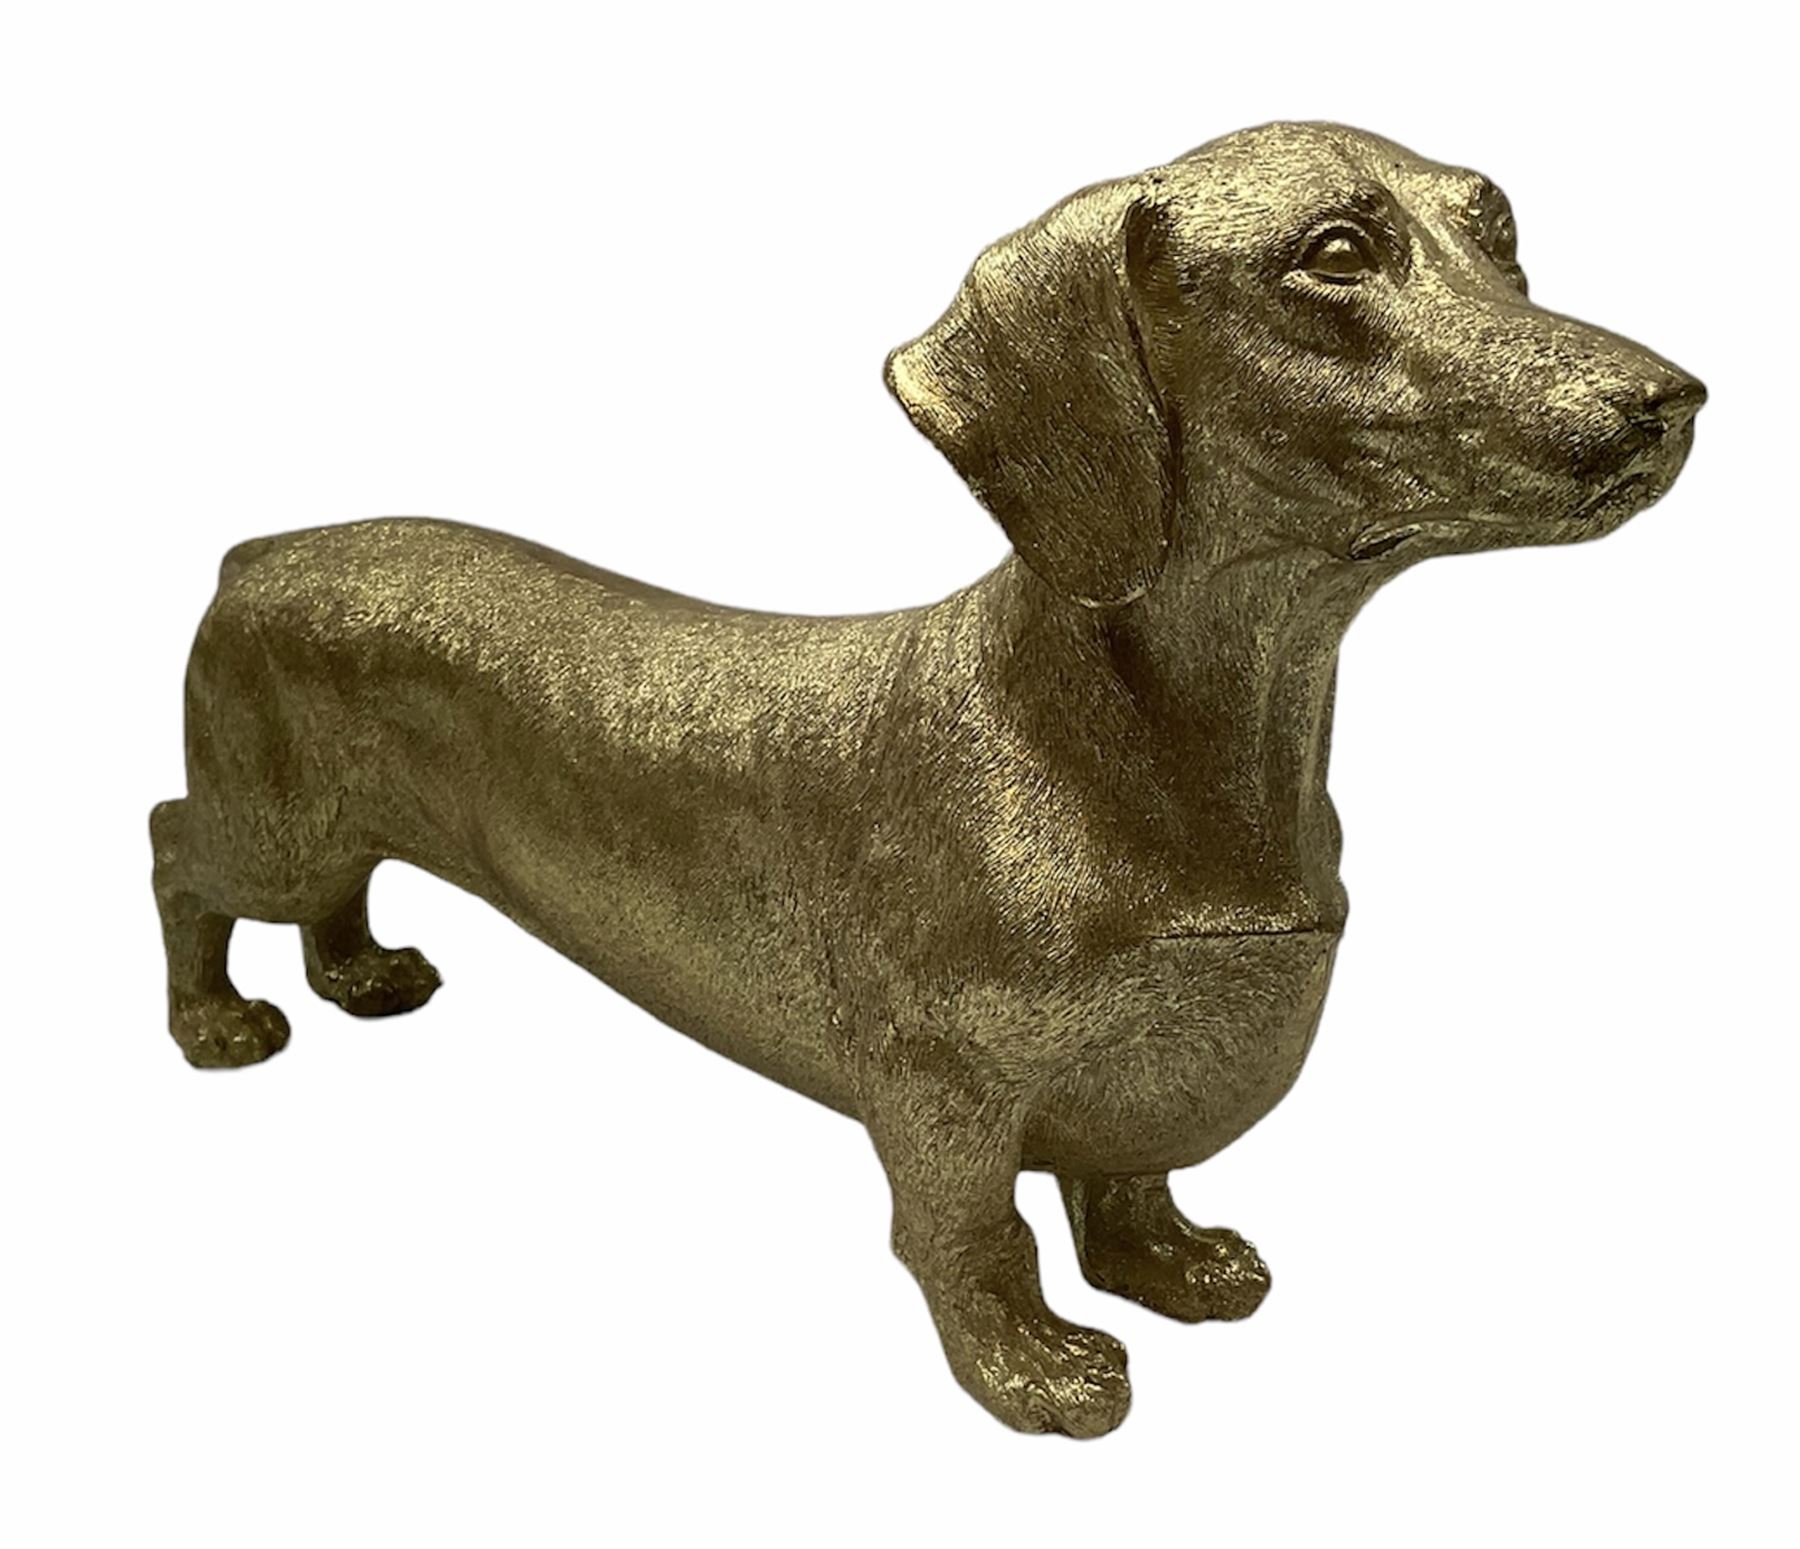 Composite metallic gold model of a Dachshund